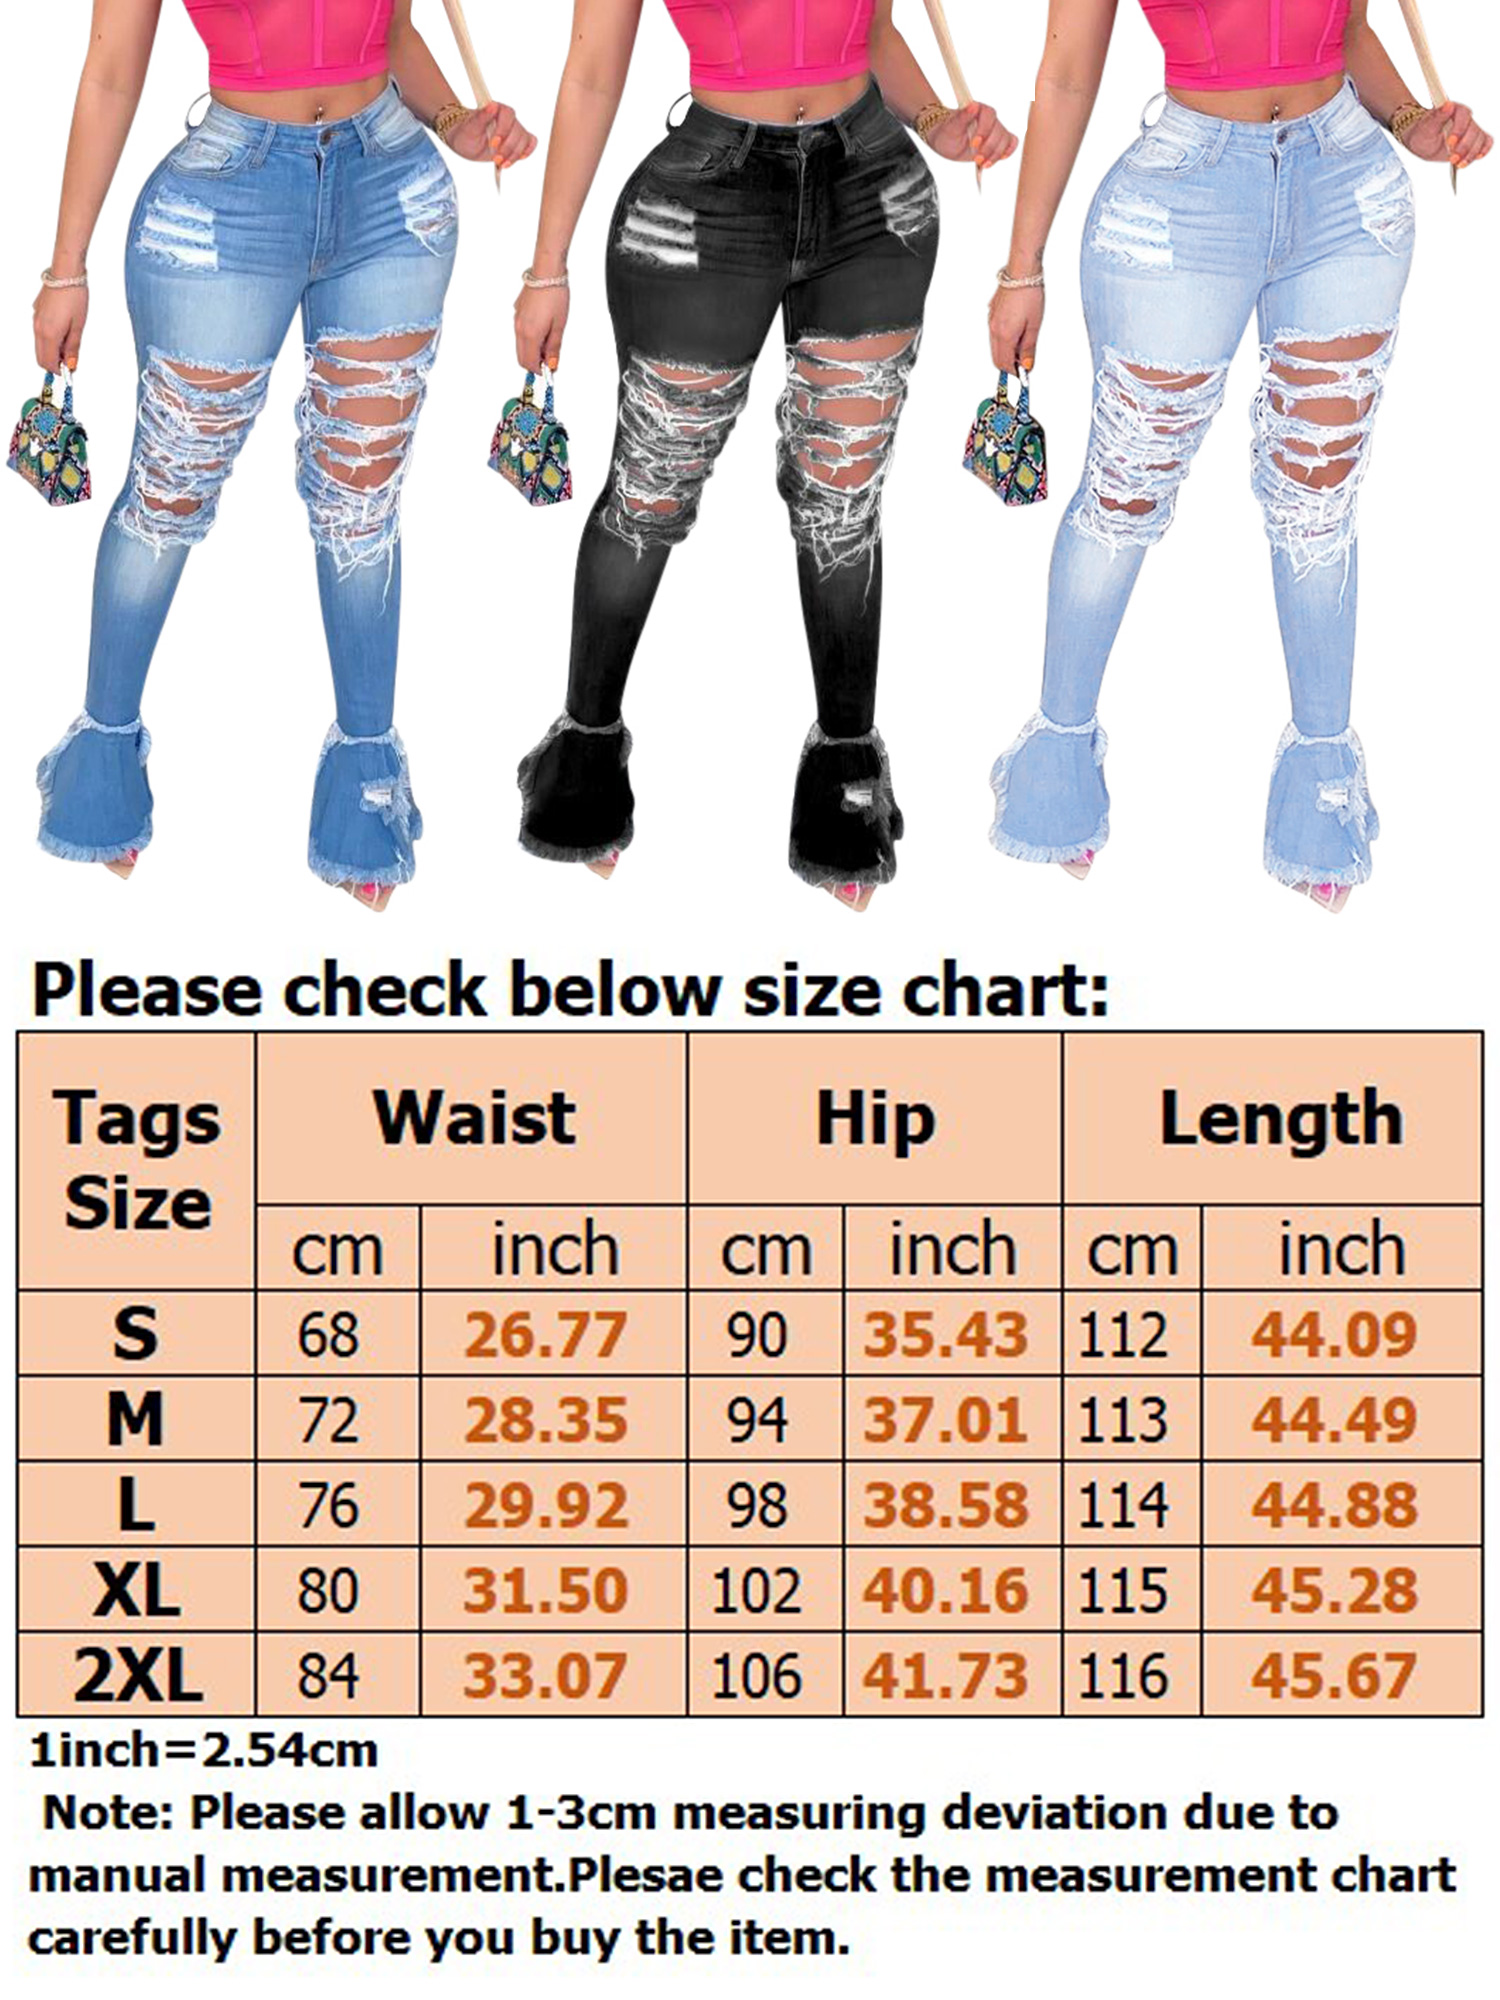 Women Casual Denim Jeans Pants Ladies Mid Waist Ripped Bell Bottom Jegging Trouser Pants Jeans with Hole - image 2 of 3